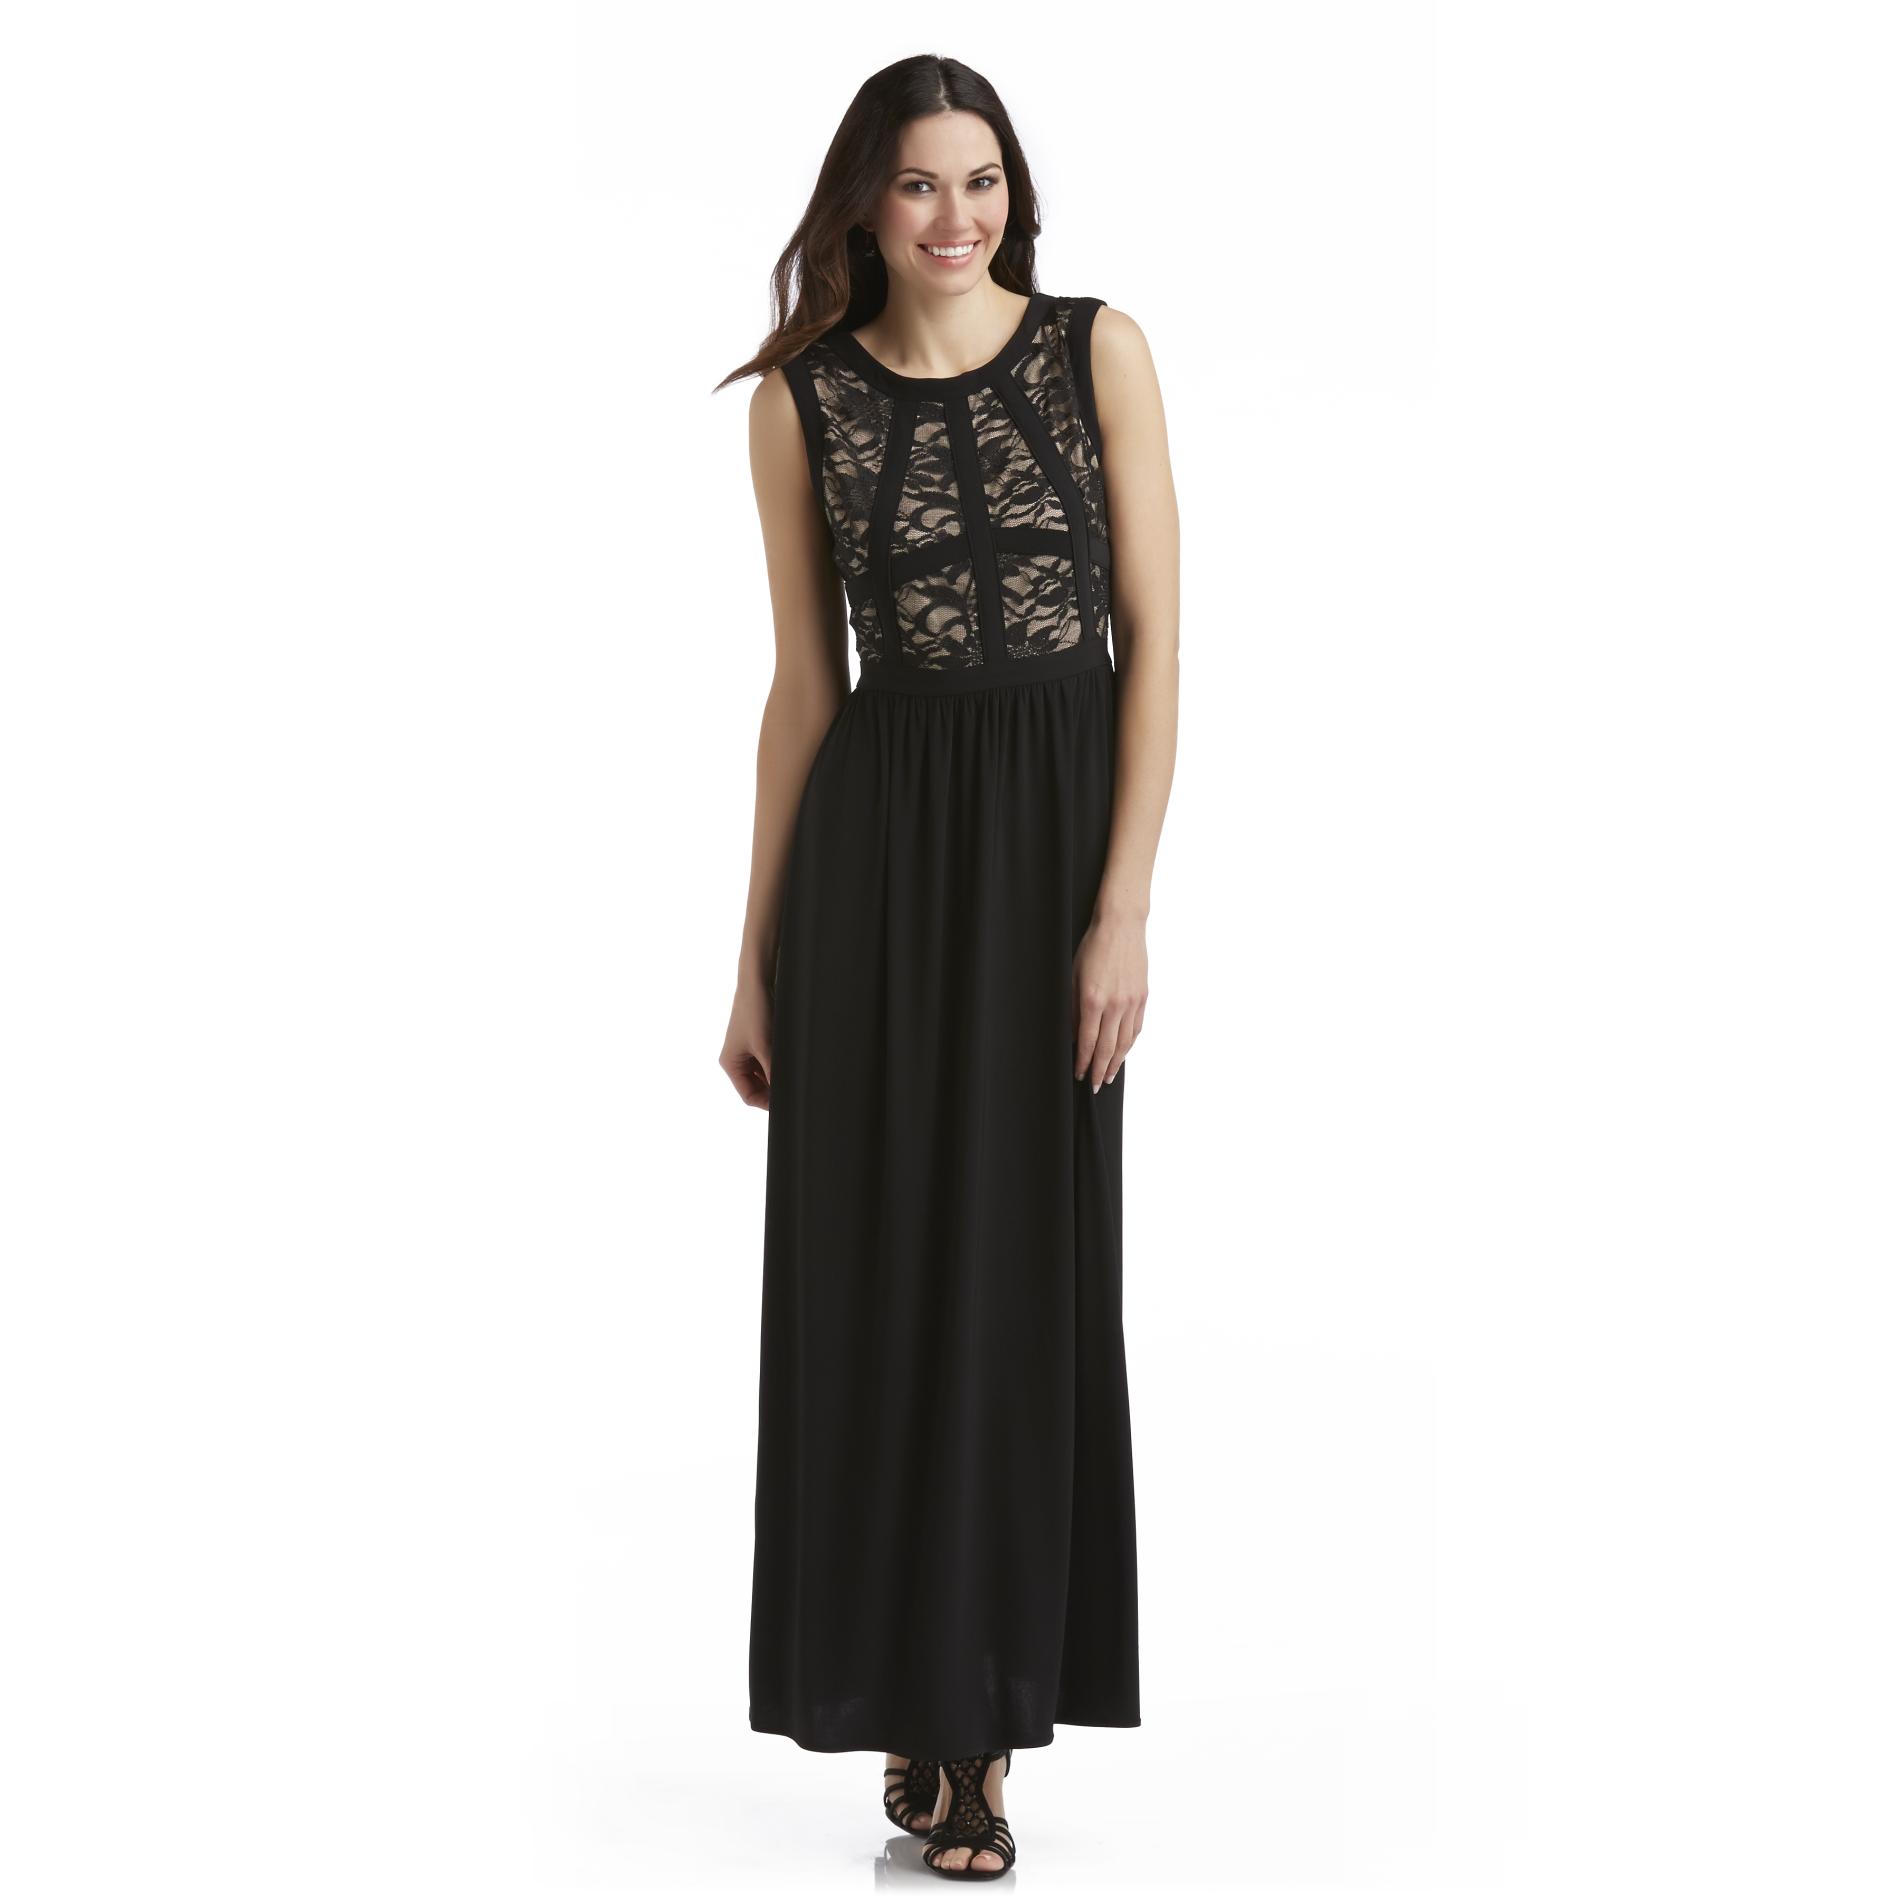 Kathy Roberts Women's Sleeveless Special Occasion Maxi Dress - Lace